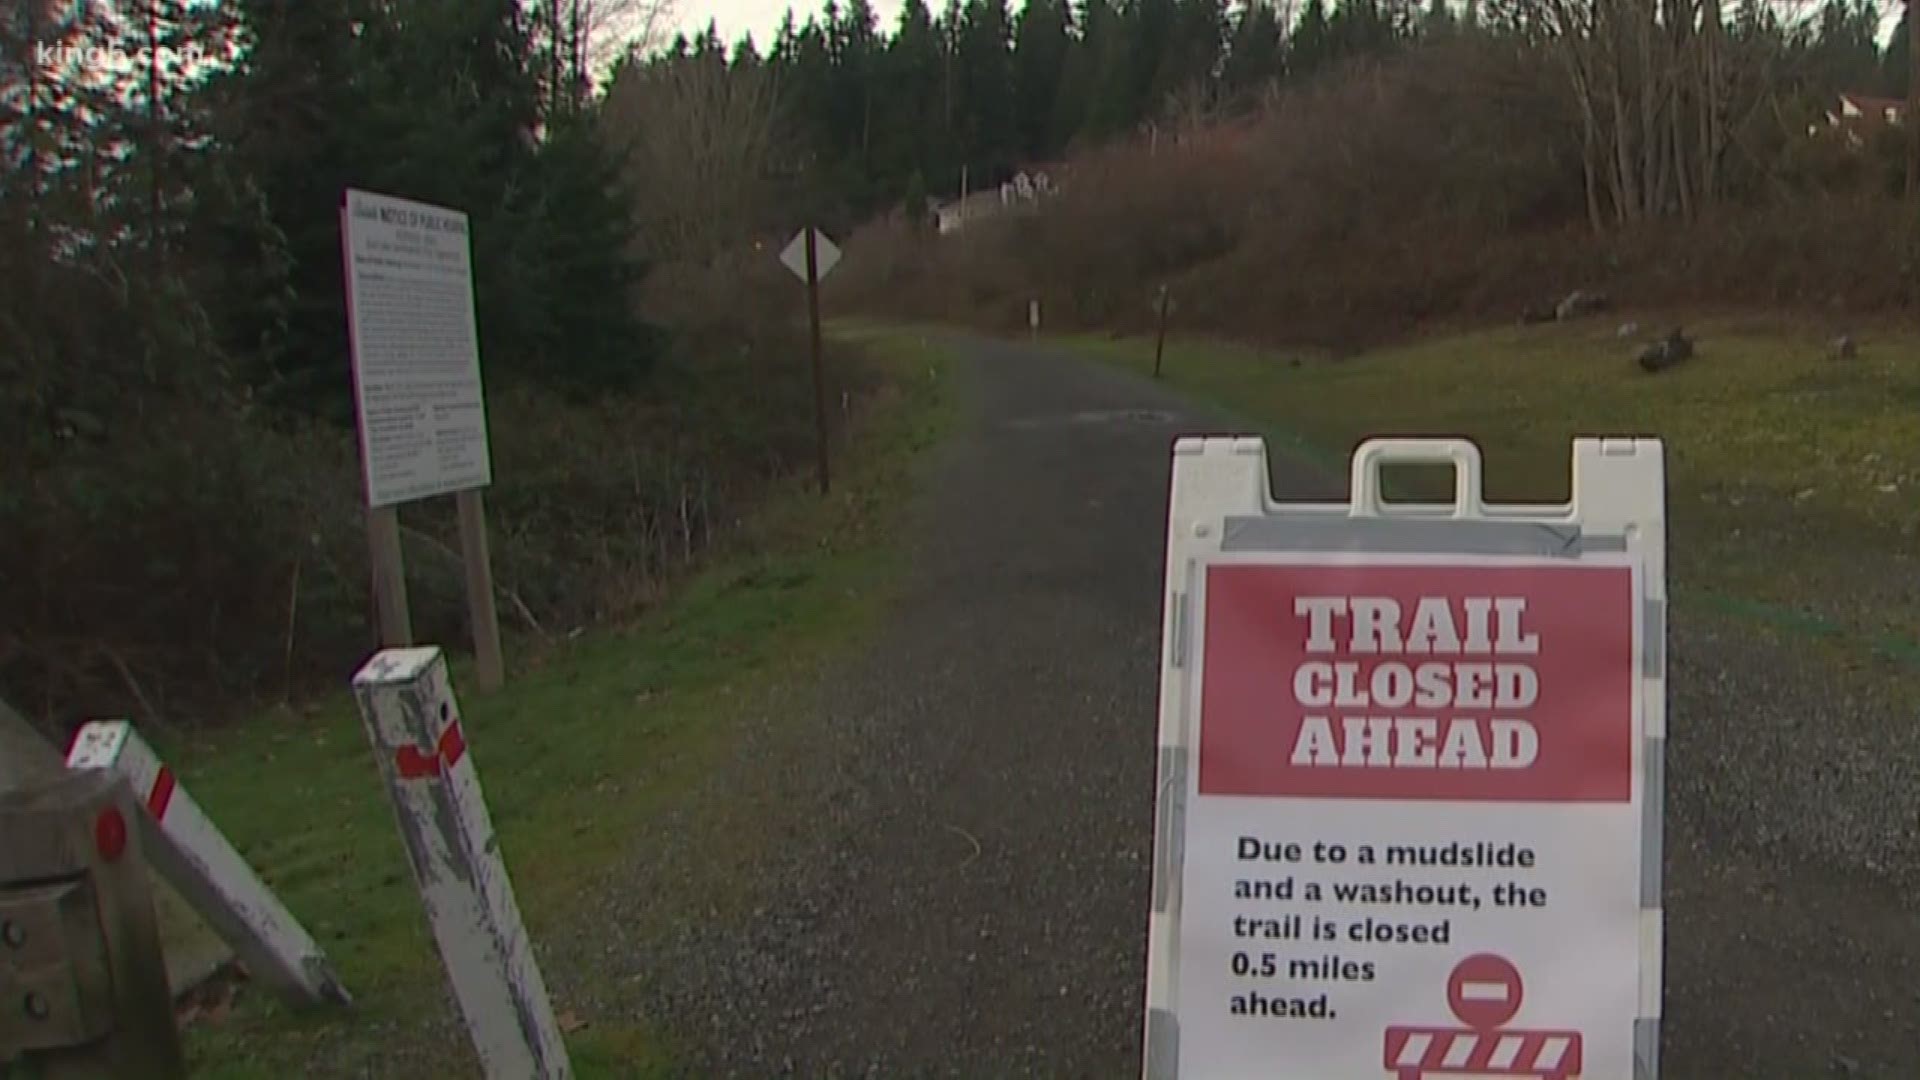 King County wants property owners along the East Lake Sammamish Trail to remove any personal property from the publicly-owned trail. KING 5's Ted Land reports.